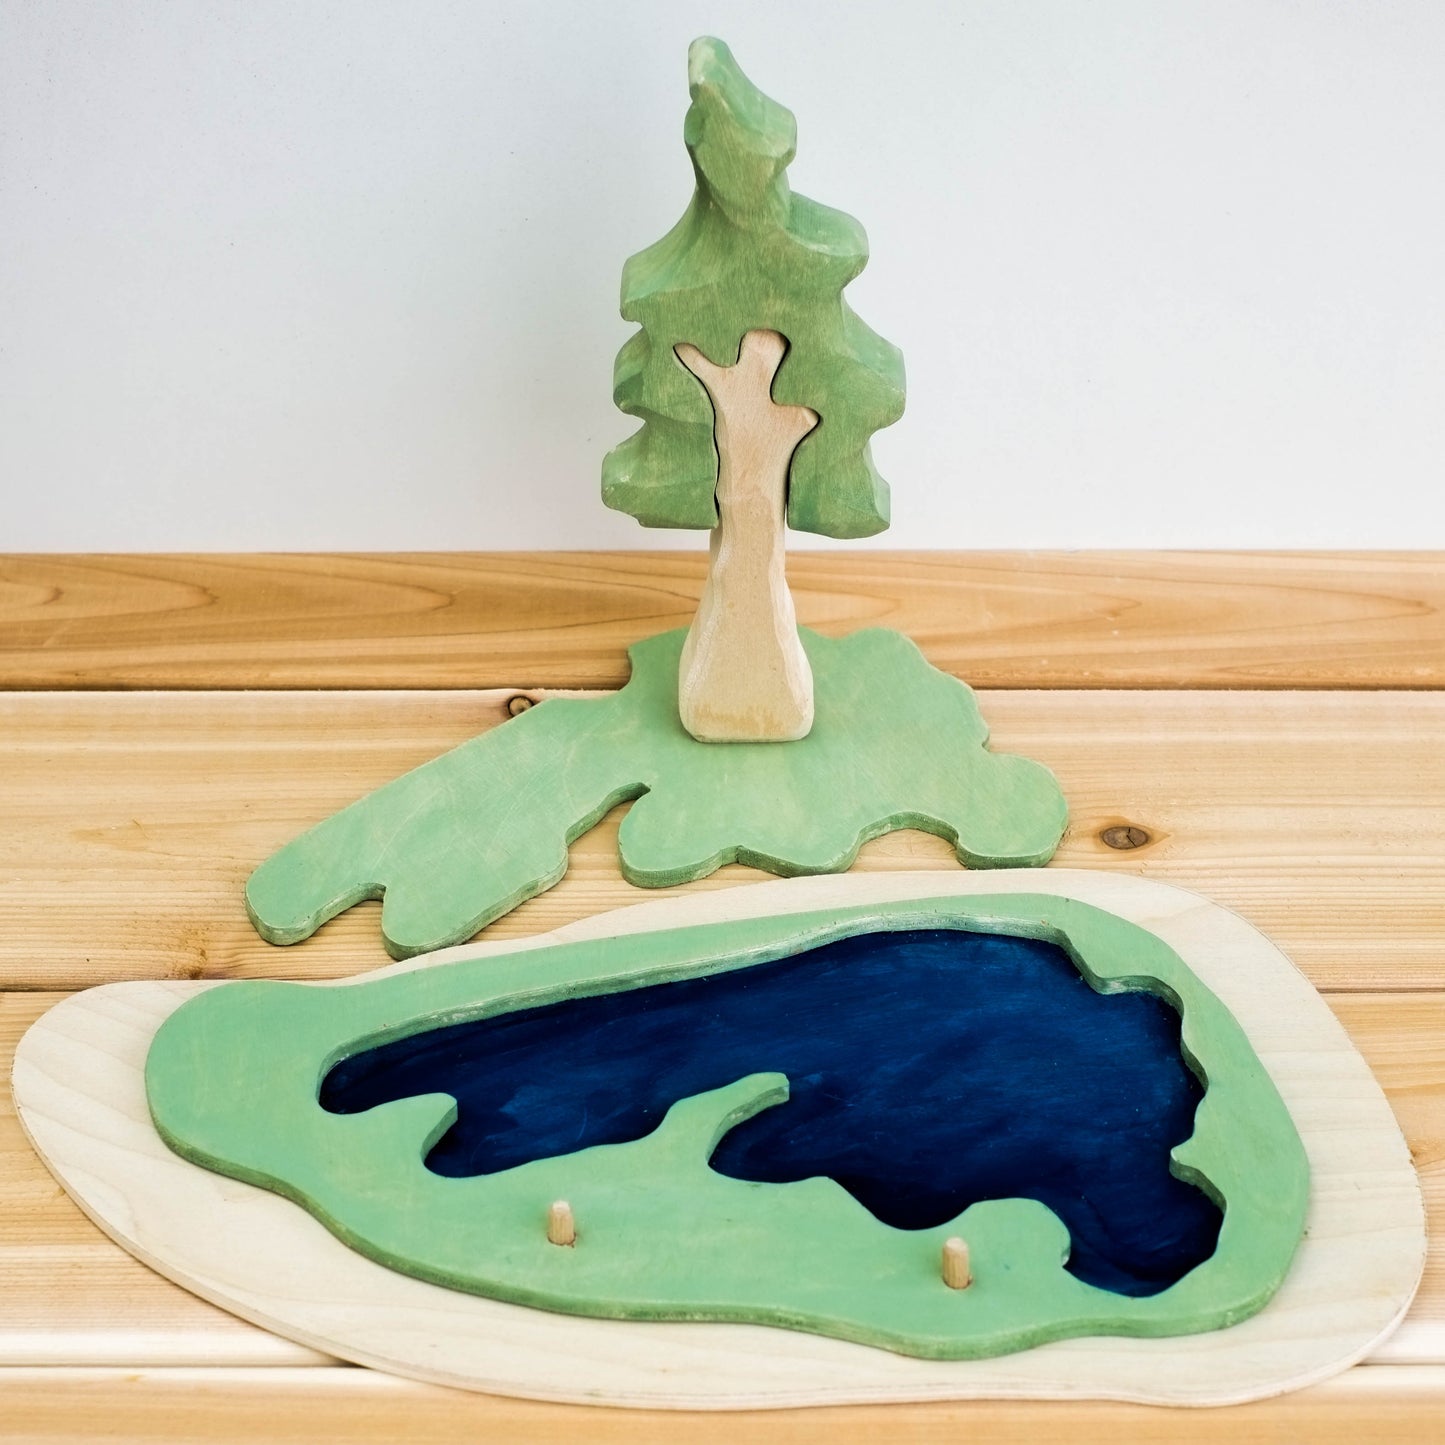 Great Lakes Playscapes - Small World Scenery Made in Canada